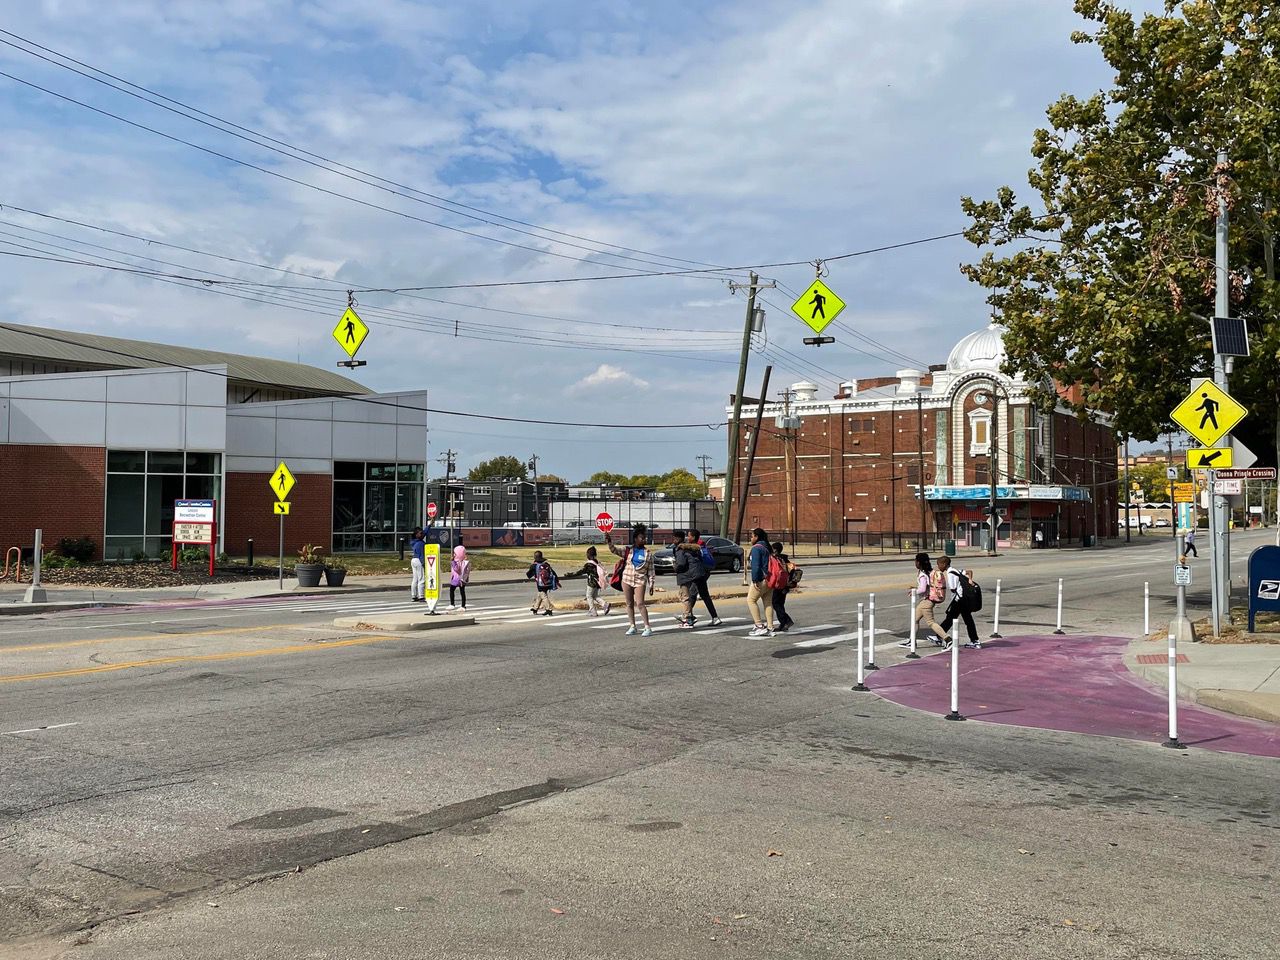 The city's Department of Transportation and Engineering made several road enhancements to Linn Street after a driver struck and killed a beloved West End resident. (Photo courtesy of City of Cincinnati)